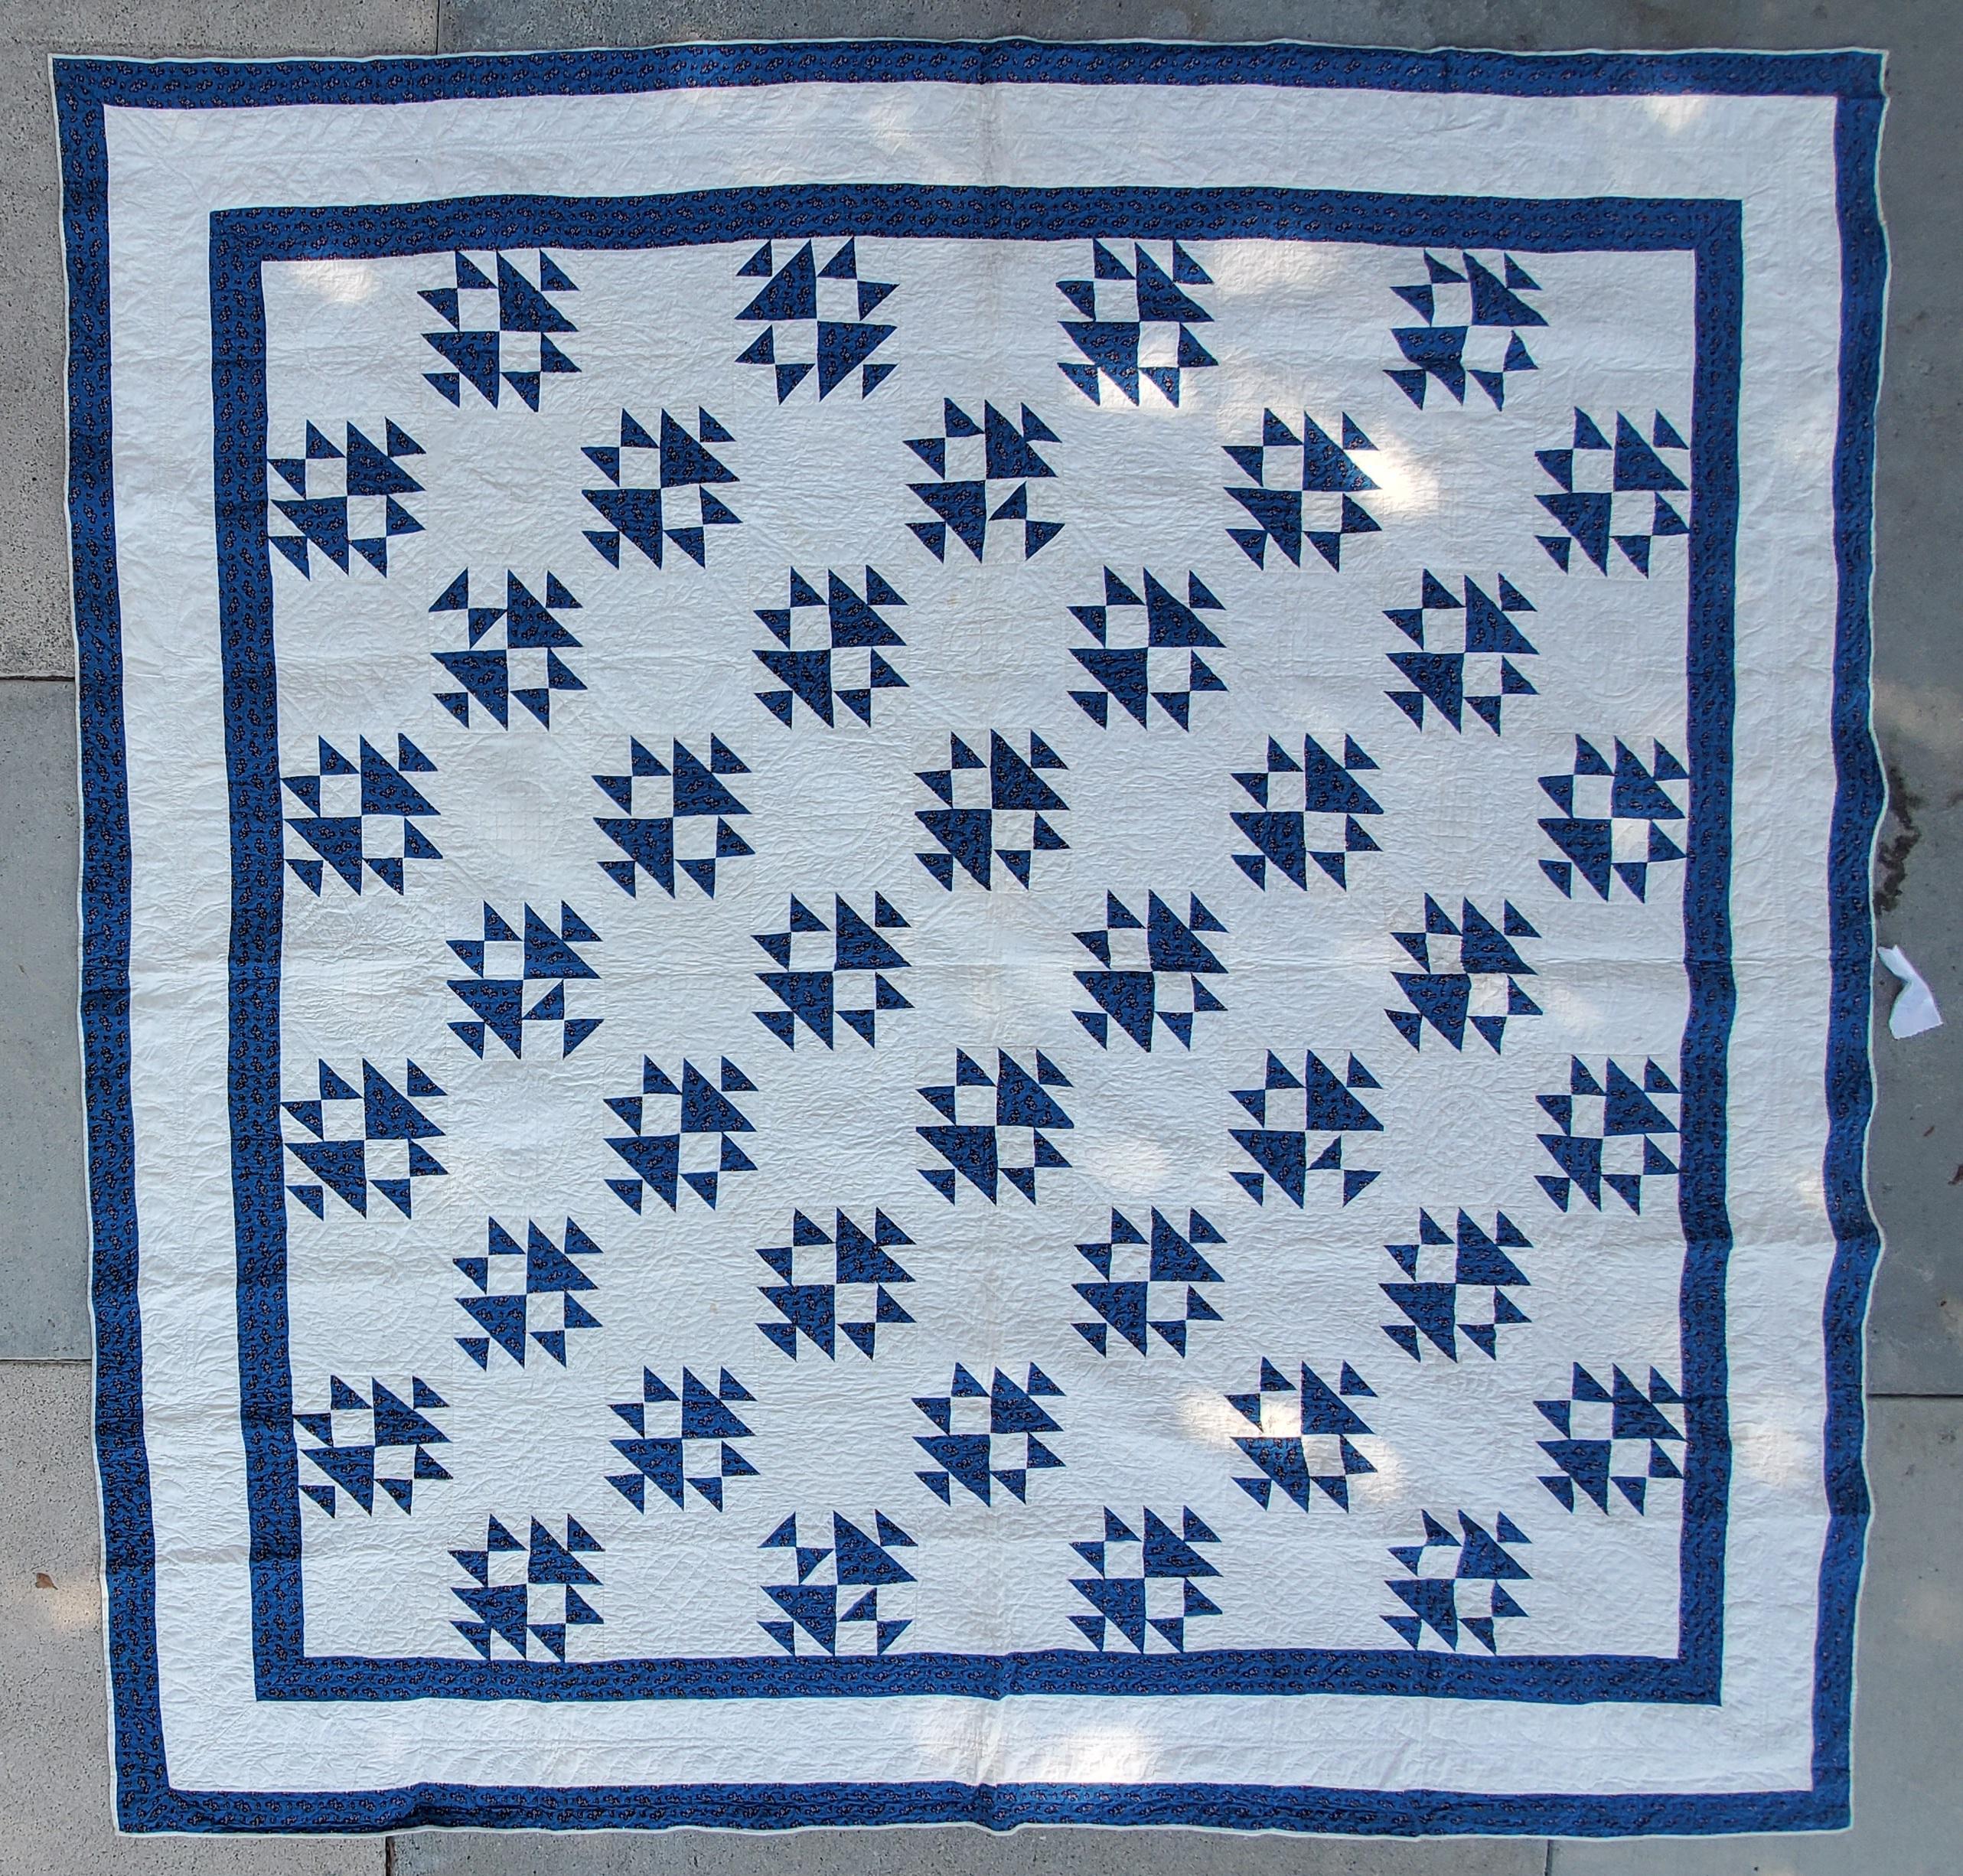 This amazing 19thc teal calico printed & white shoe fly pattern quilt from New England is quite unusual. This amazing quilt has Fine quilting and very Fine condition. This quilt has double inner borders which frames it nicely.